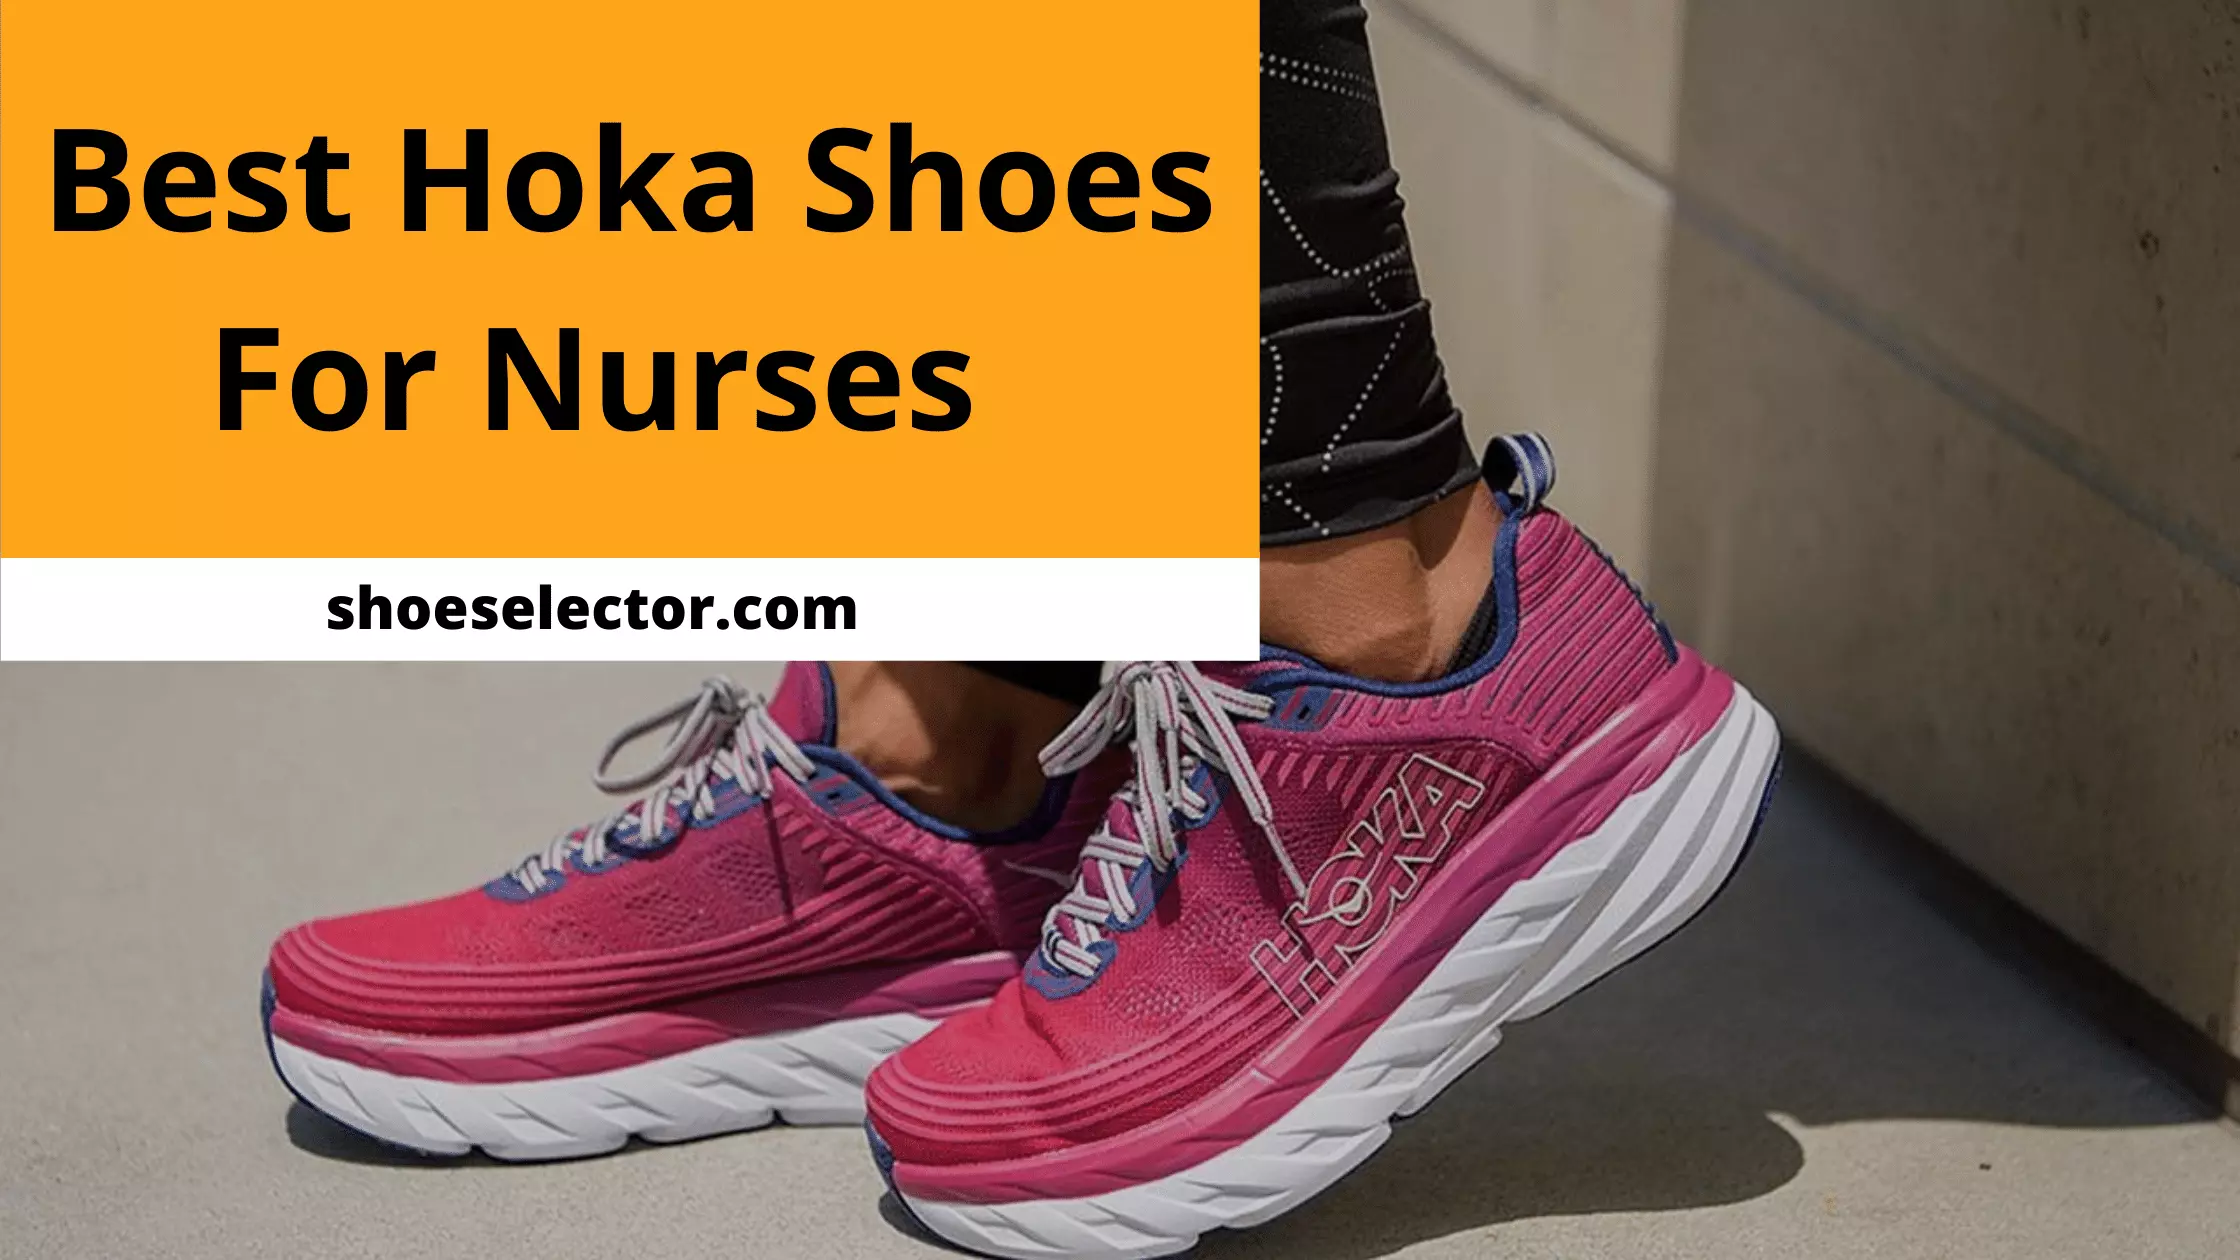 Best Hoka Shoes For Nurses - Complete Buying Guides